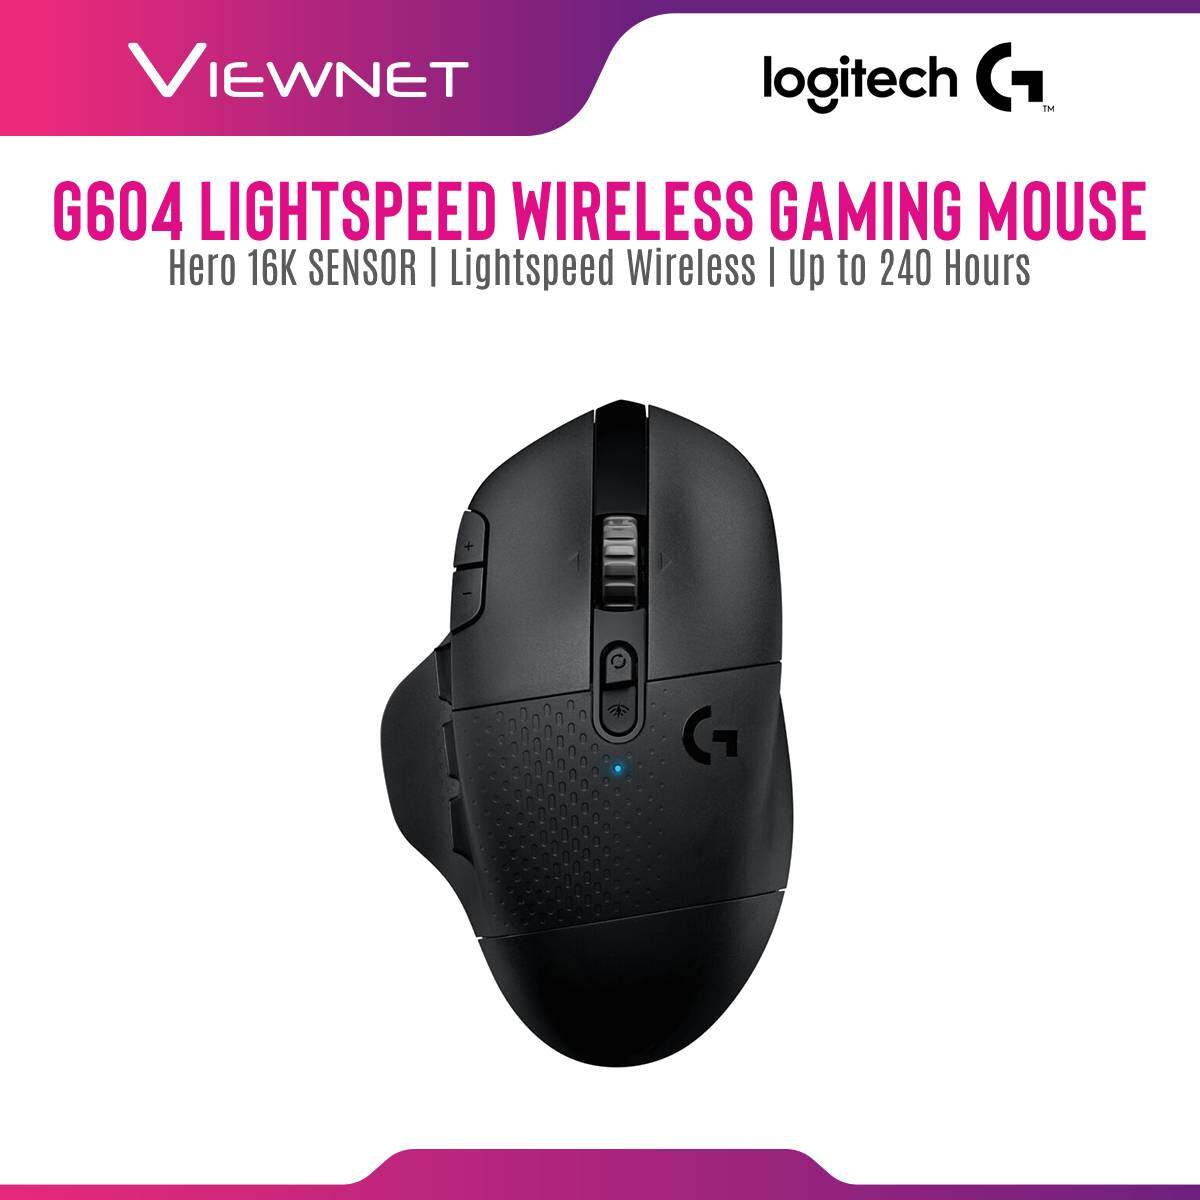 Logitech G604 Lightspeed Wireless Gaming Mouse with Hero 16K Sensor, 15 Programmable Controls, Dual Connectivity with Lightspeed, Up To 240 Hours